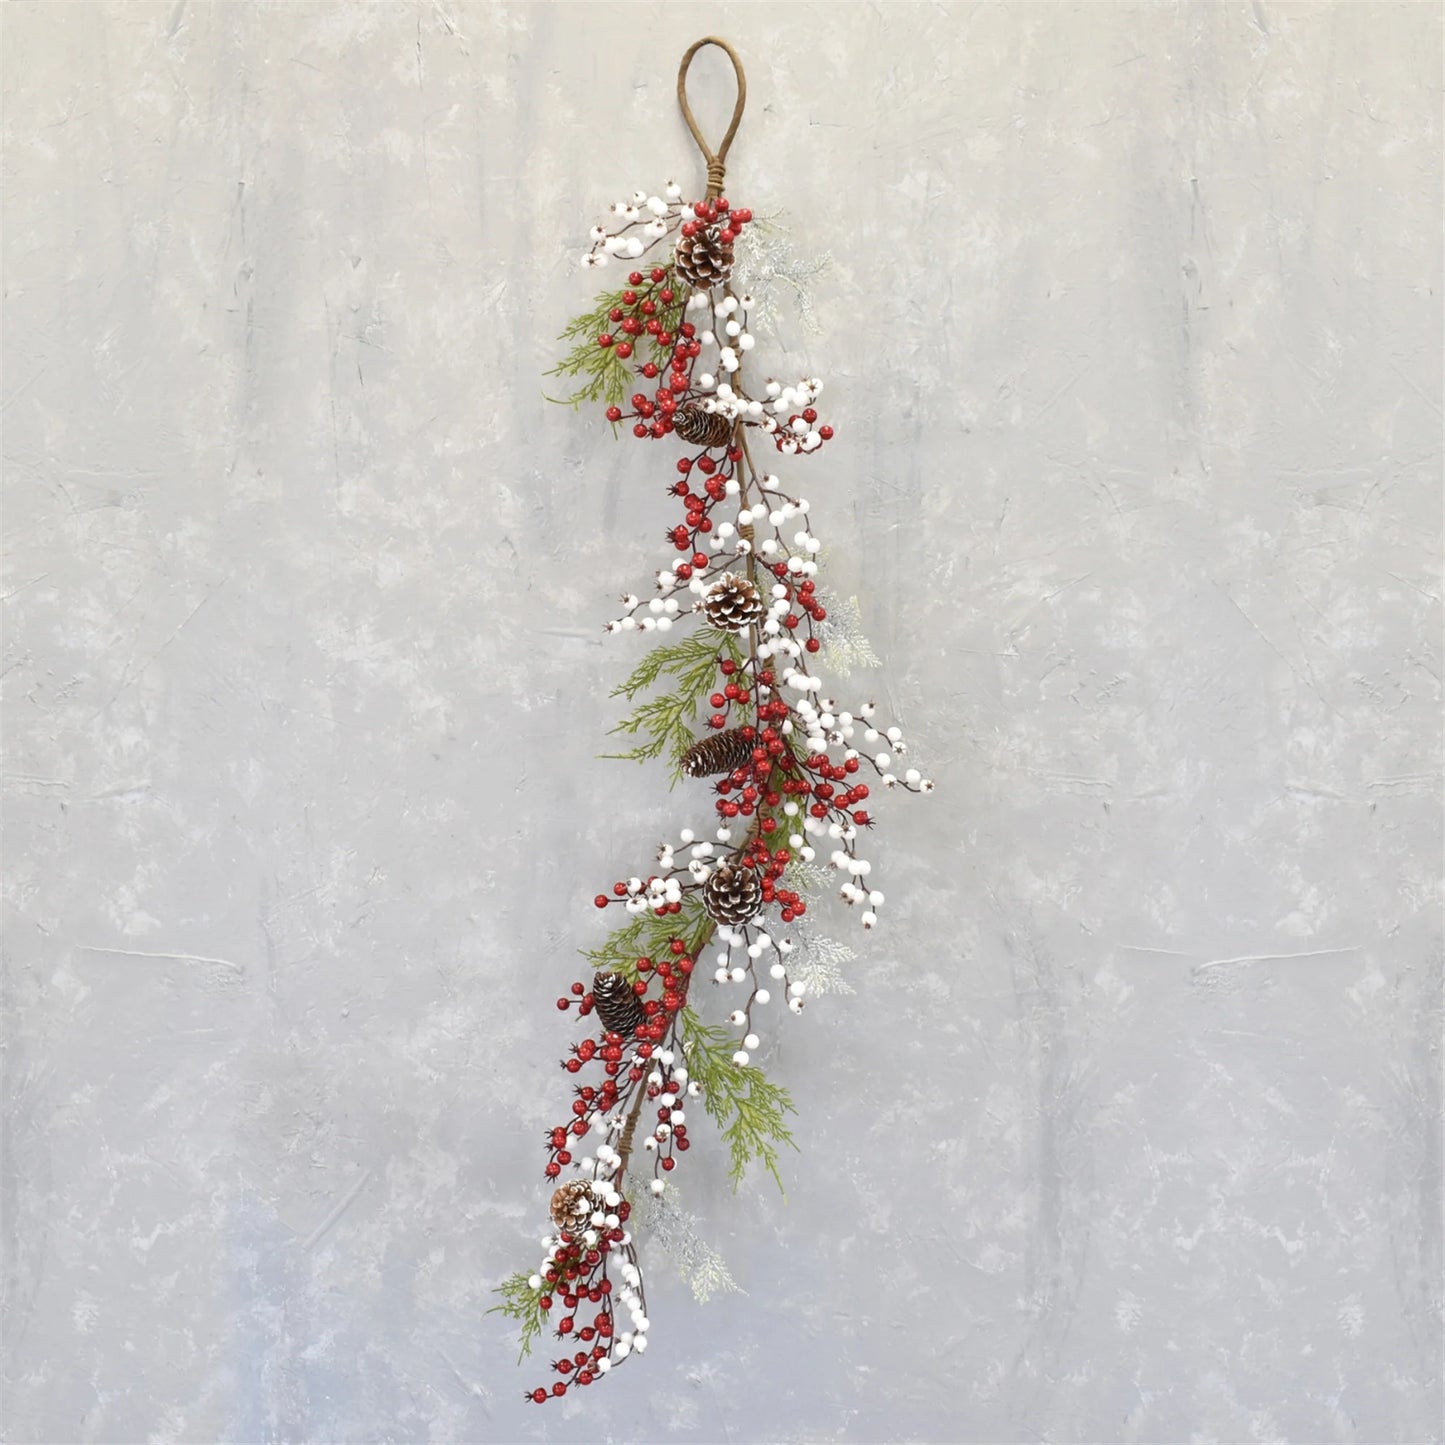 Snow Touched Cypress, Cedar, Pinecone Garland With Red And White Berries - Red White Green 54"